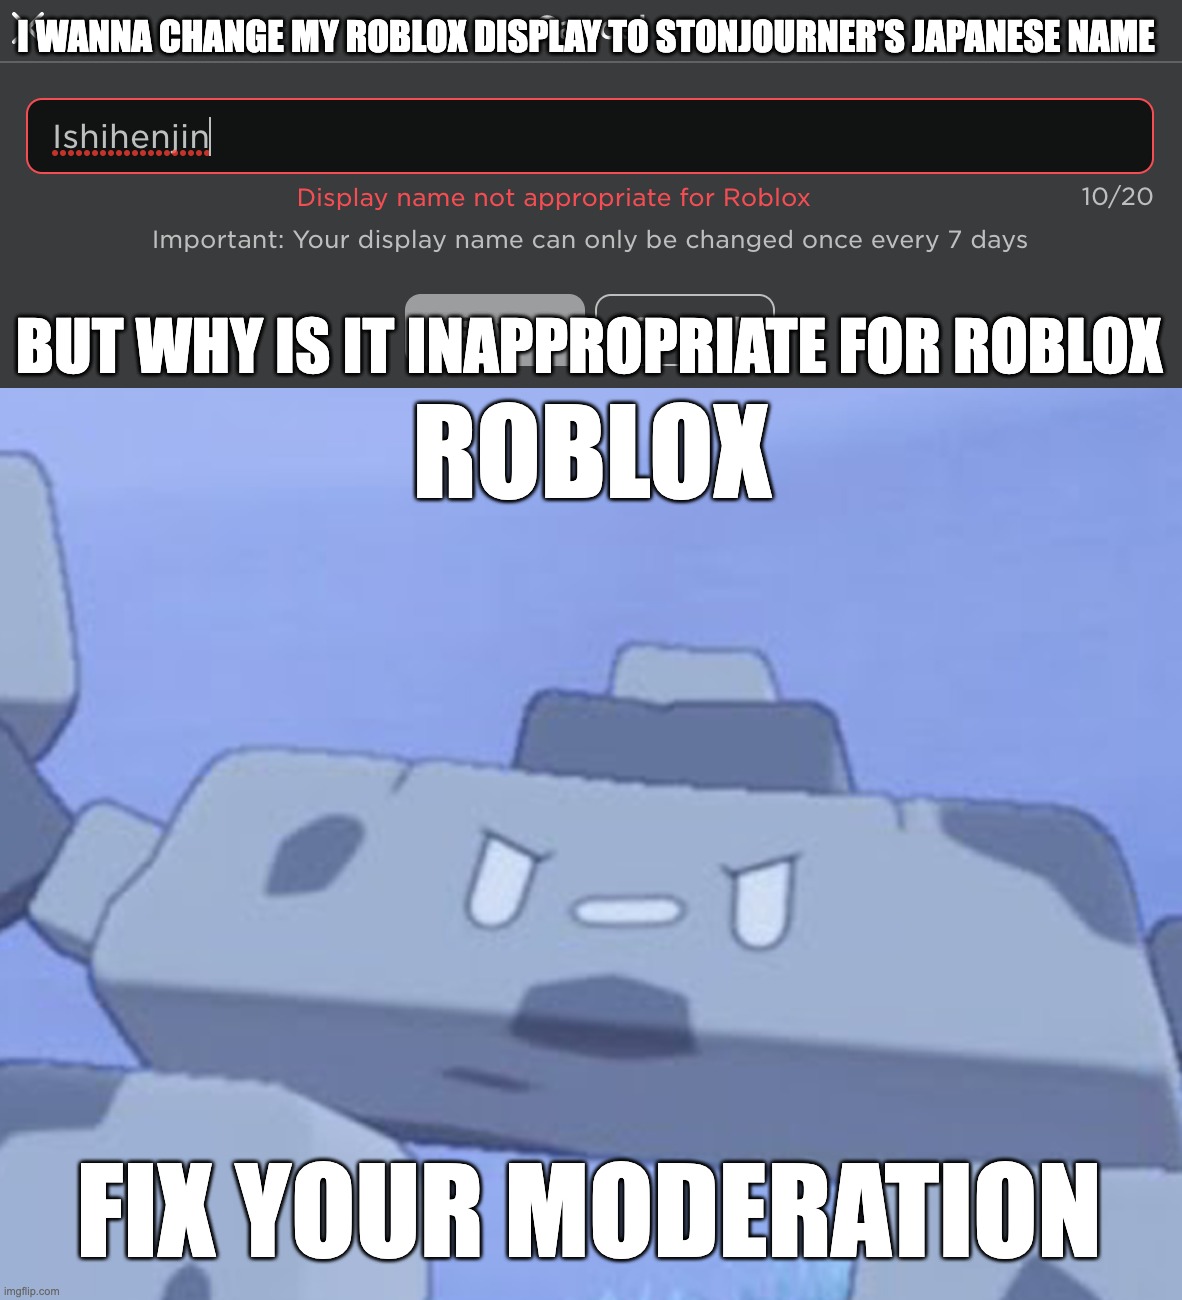 Roblox is moderating an icon and I don't know how to fix - Art